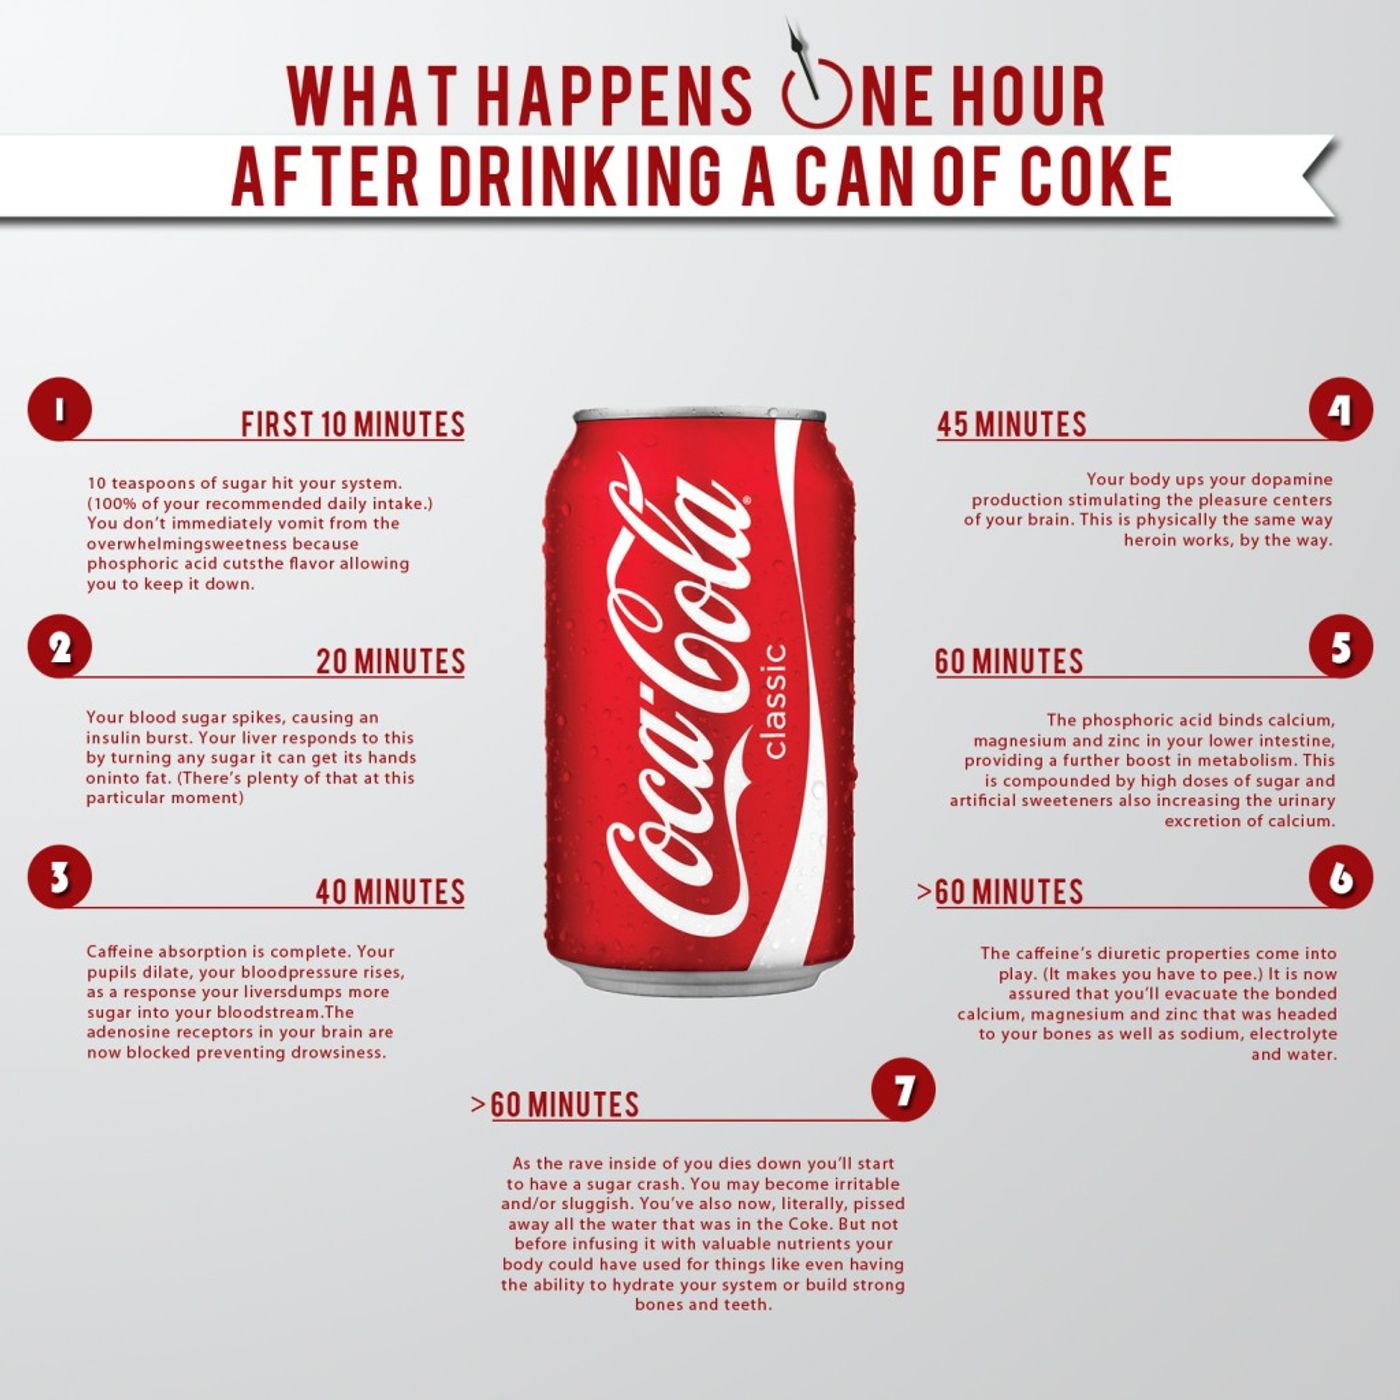 Coca-Cola probably isn't one of the best drinks for you to have.